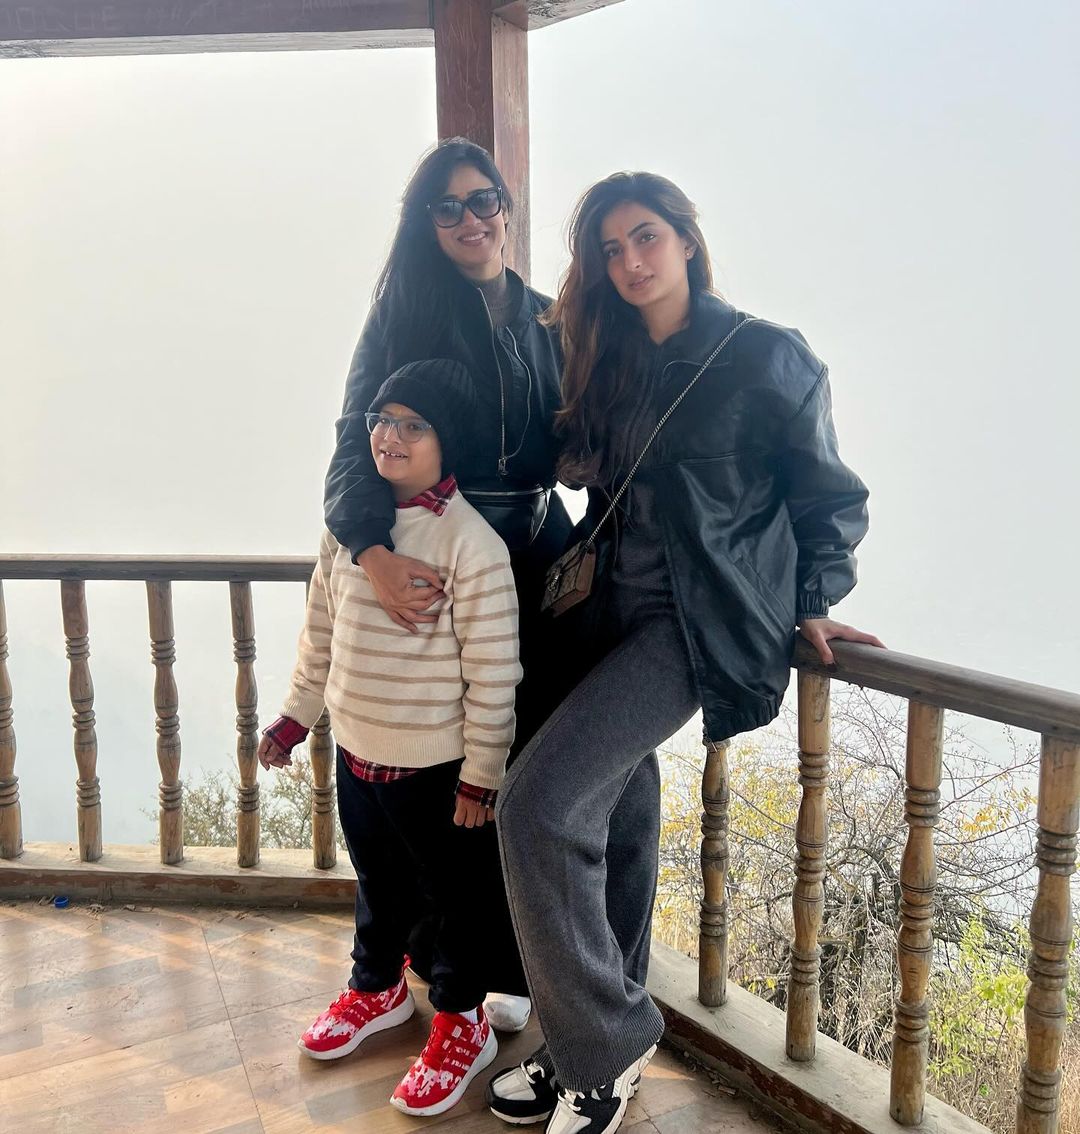 Actress Swetha Tiwari Enjoyed Her Vacation With Her Loveable Family Who Shared Pictures On Instagram. She Posed Pictures With Her Son Reyansh And Daughter Palak